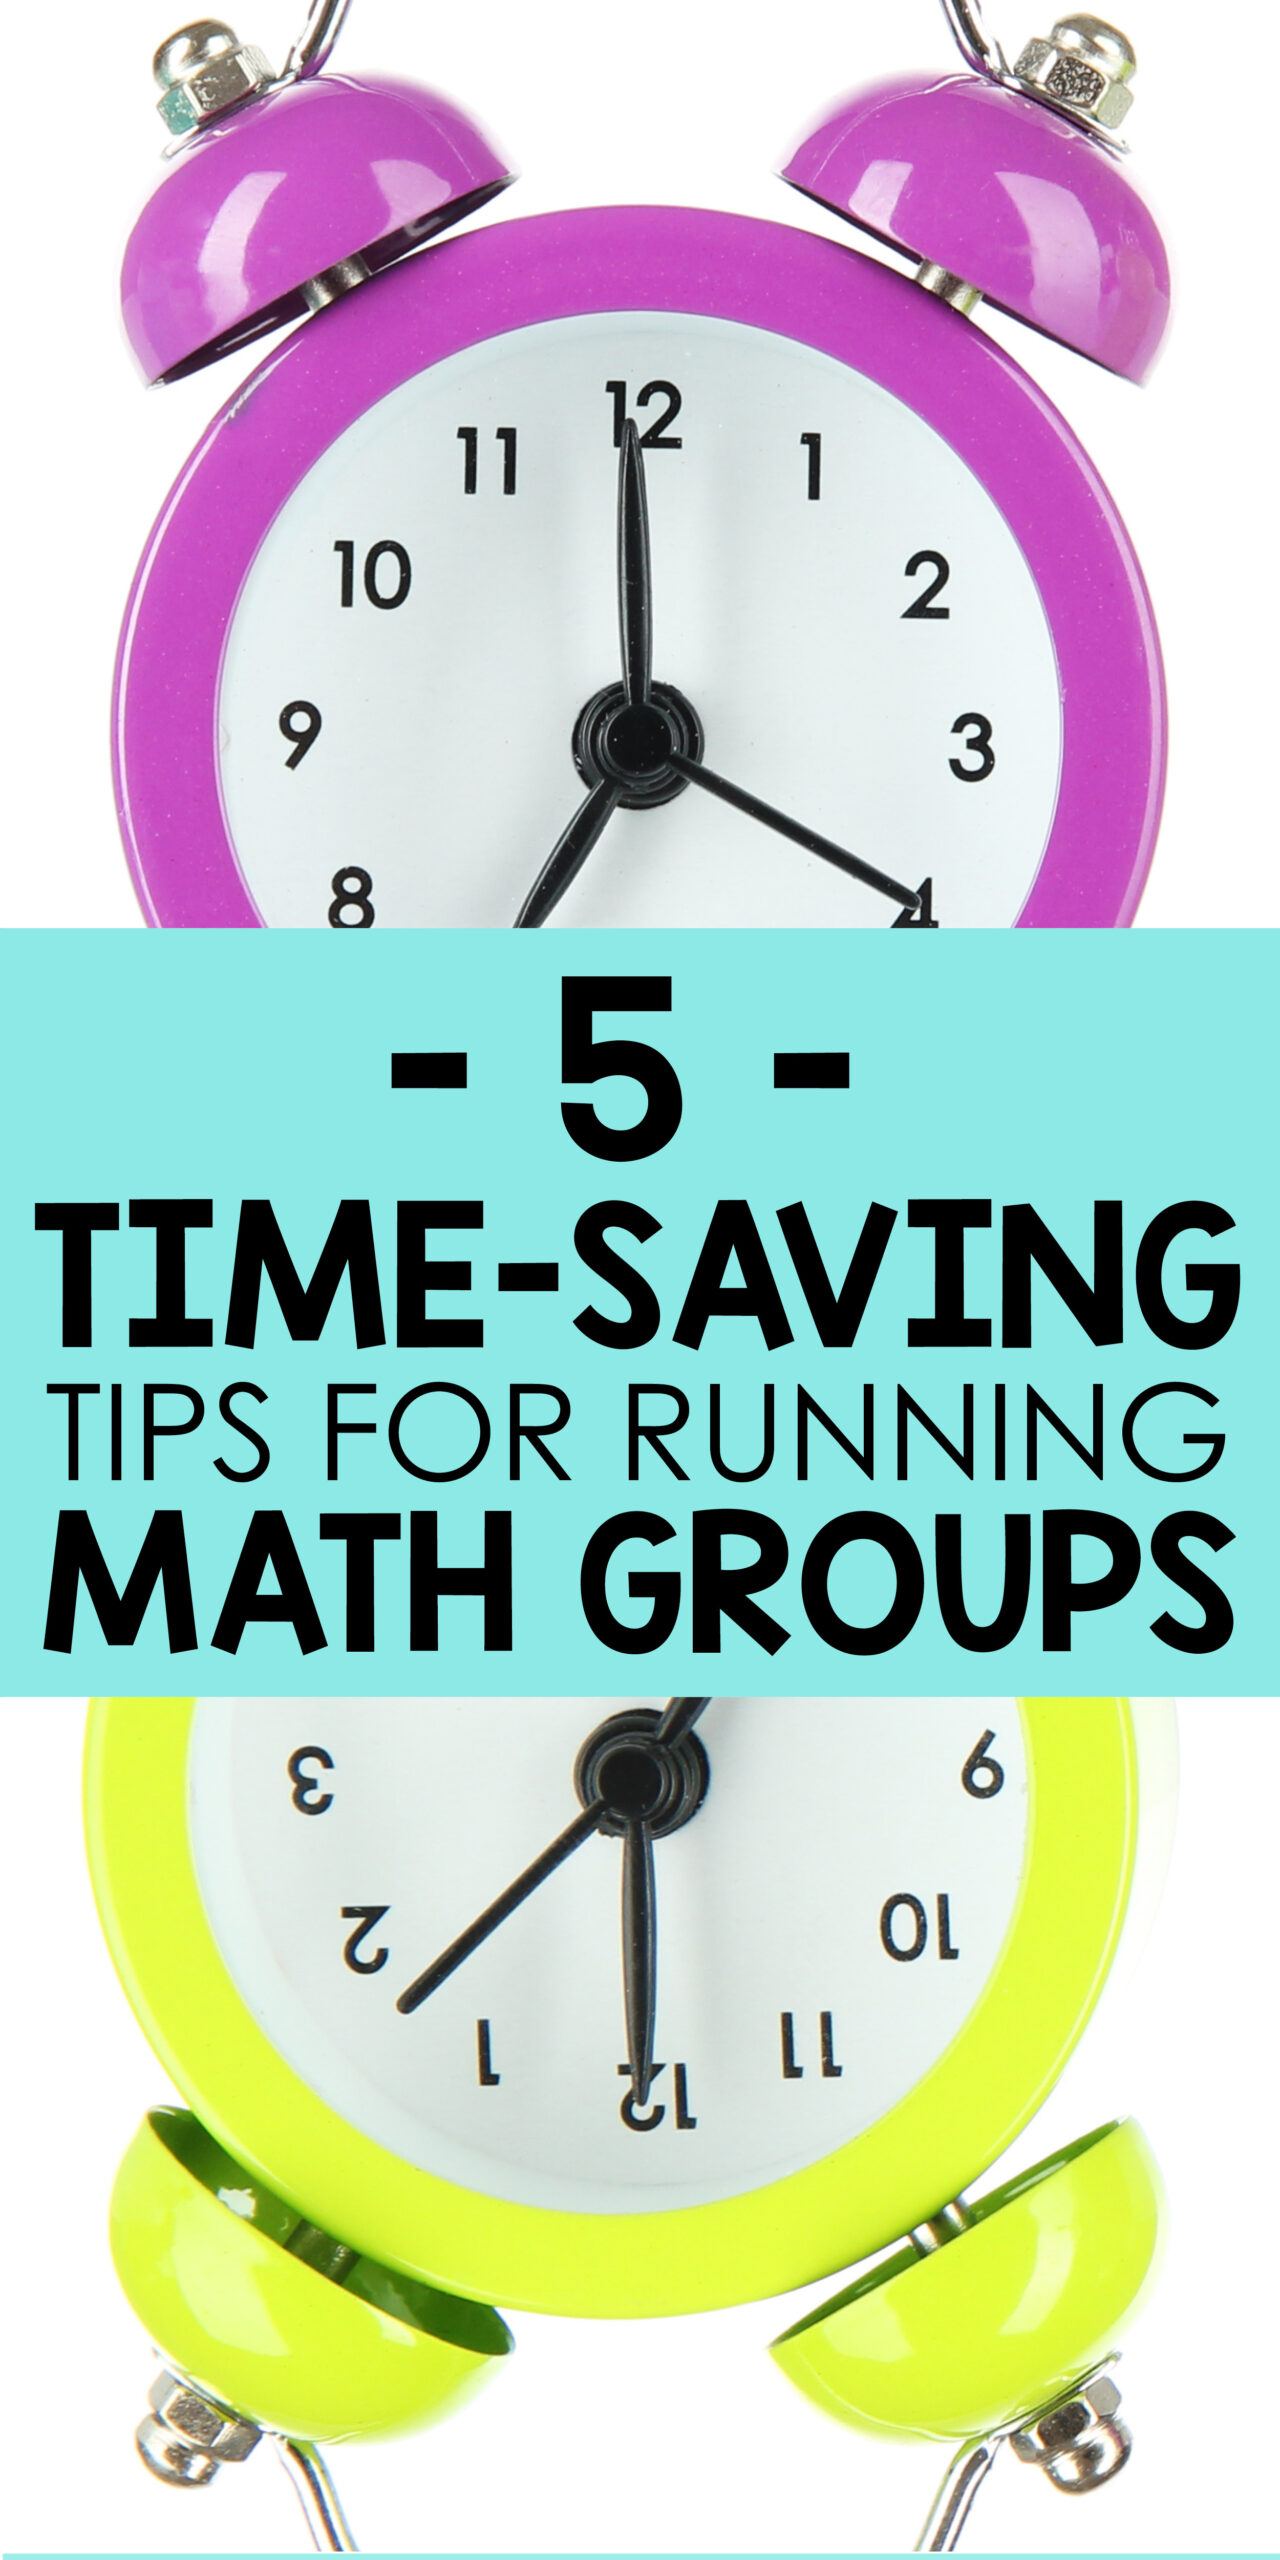 Time-Saving Tips for running math groups! Looking to teach Guided Math, or do small groups instruction during your math block? Here are some great ways to save time while planning rotations and organizing activities for your small math groups with your first, second or third graders.